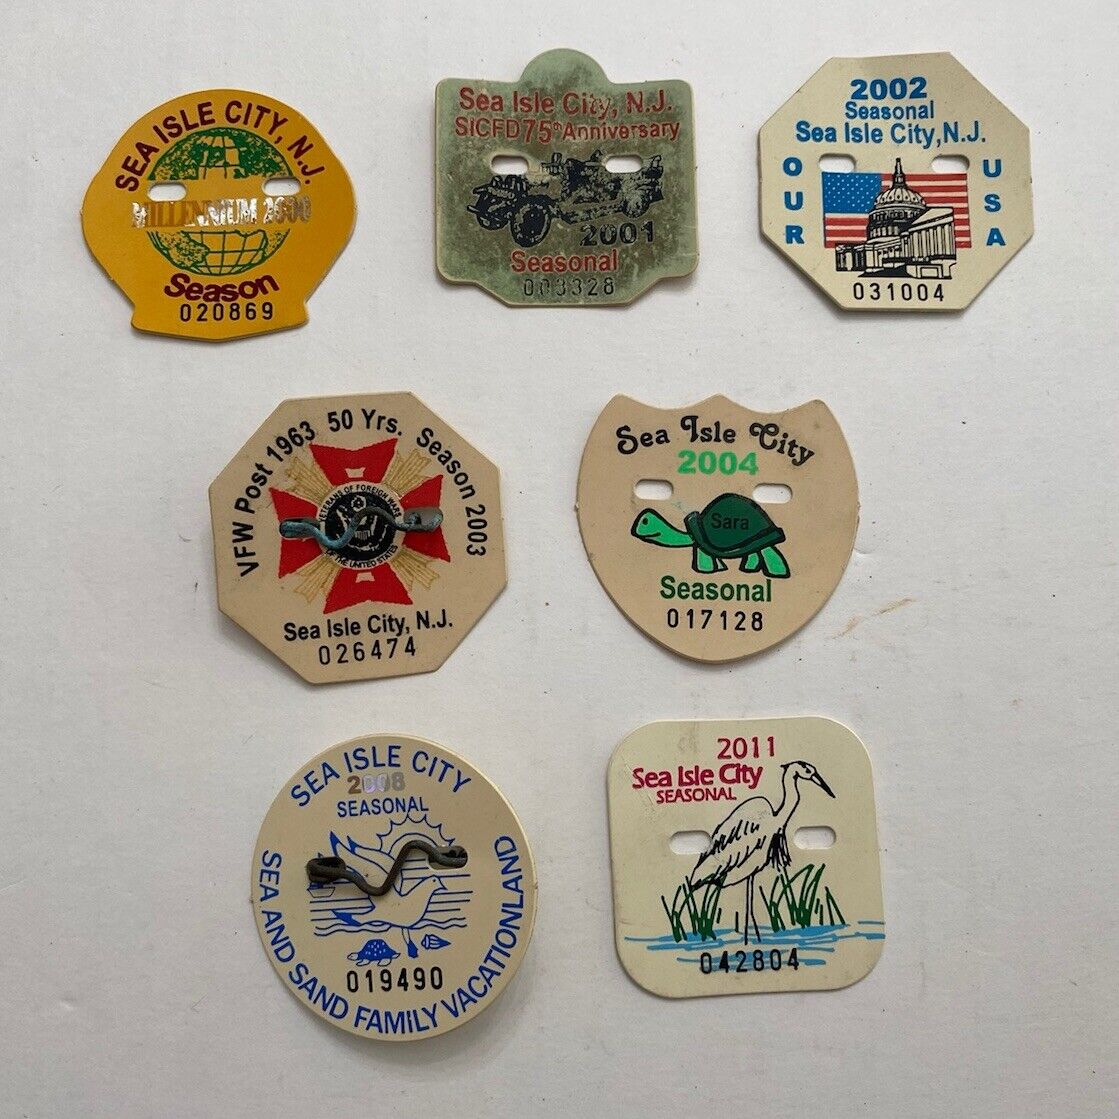 Sea Isle City NJ Beach Tag/Badge Collection 2000-2011 Lot of 7 New Jersey Shore